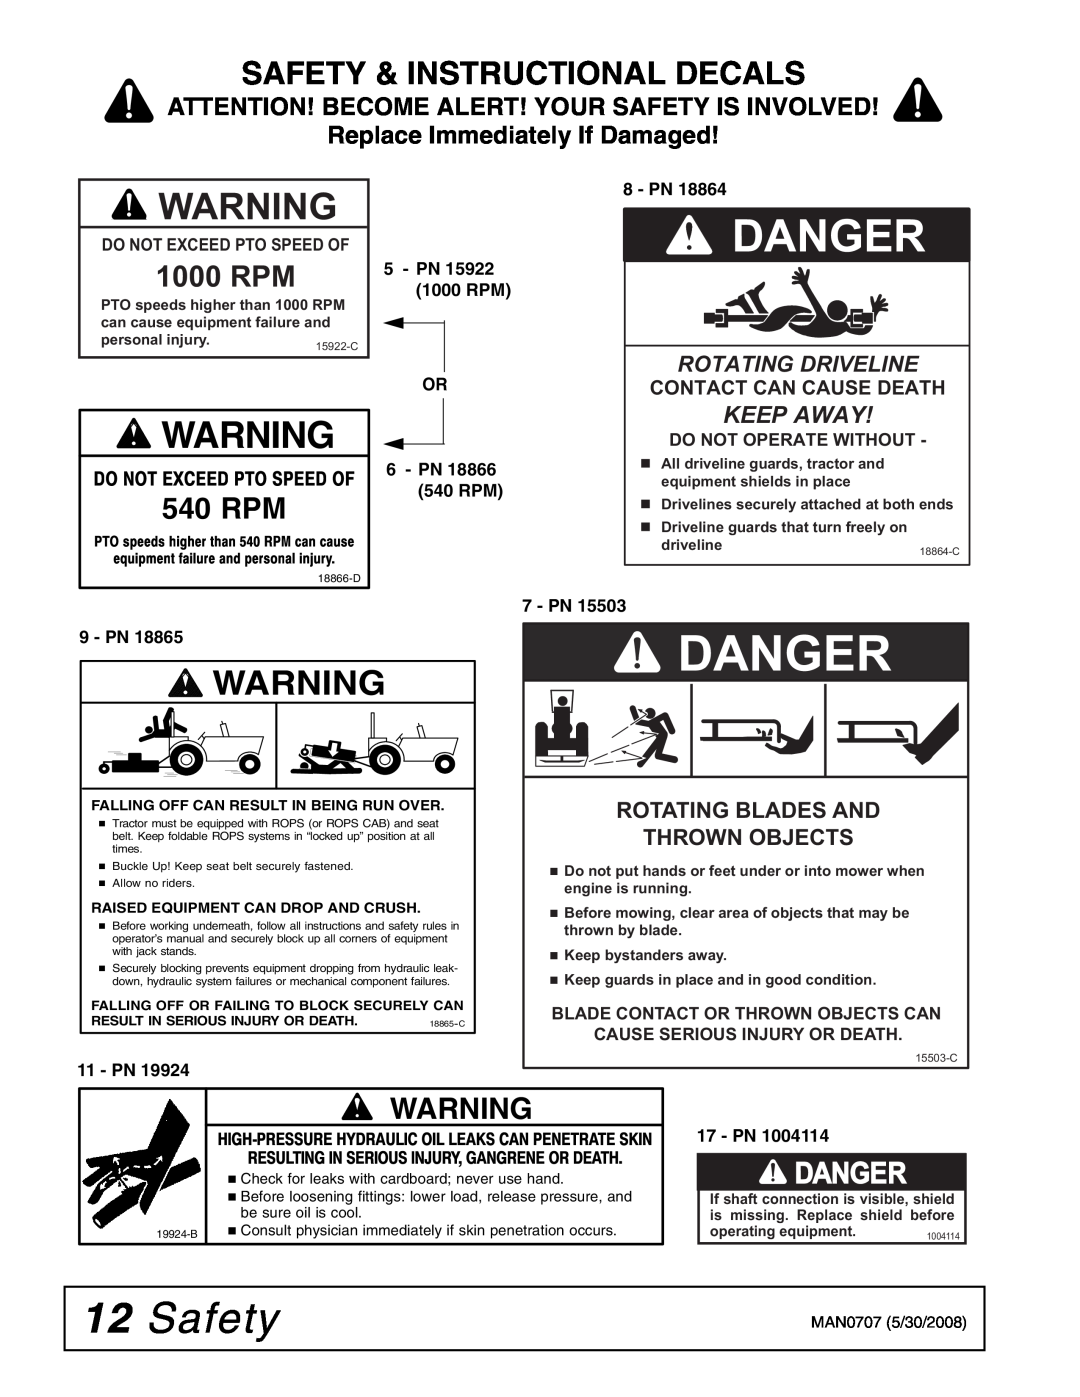 Woods Equipment BW180HBQ Danger, Safety & Instructional Decals, 1000 RPM, Replace Immediately If Damaged, Keep Away 